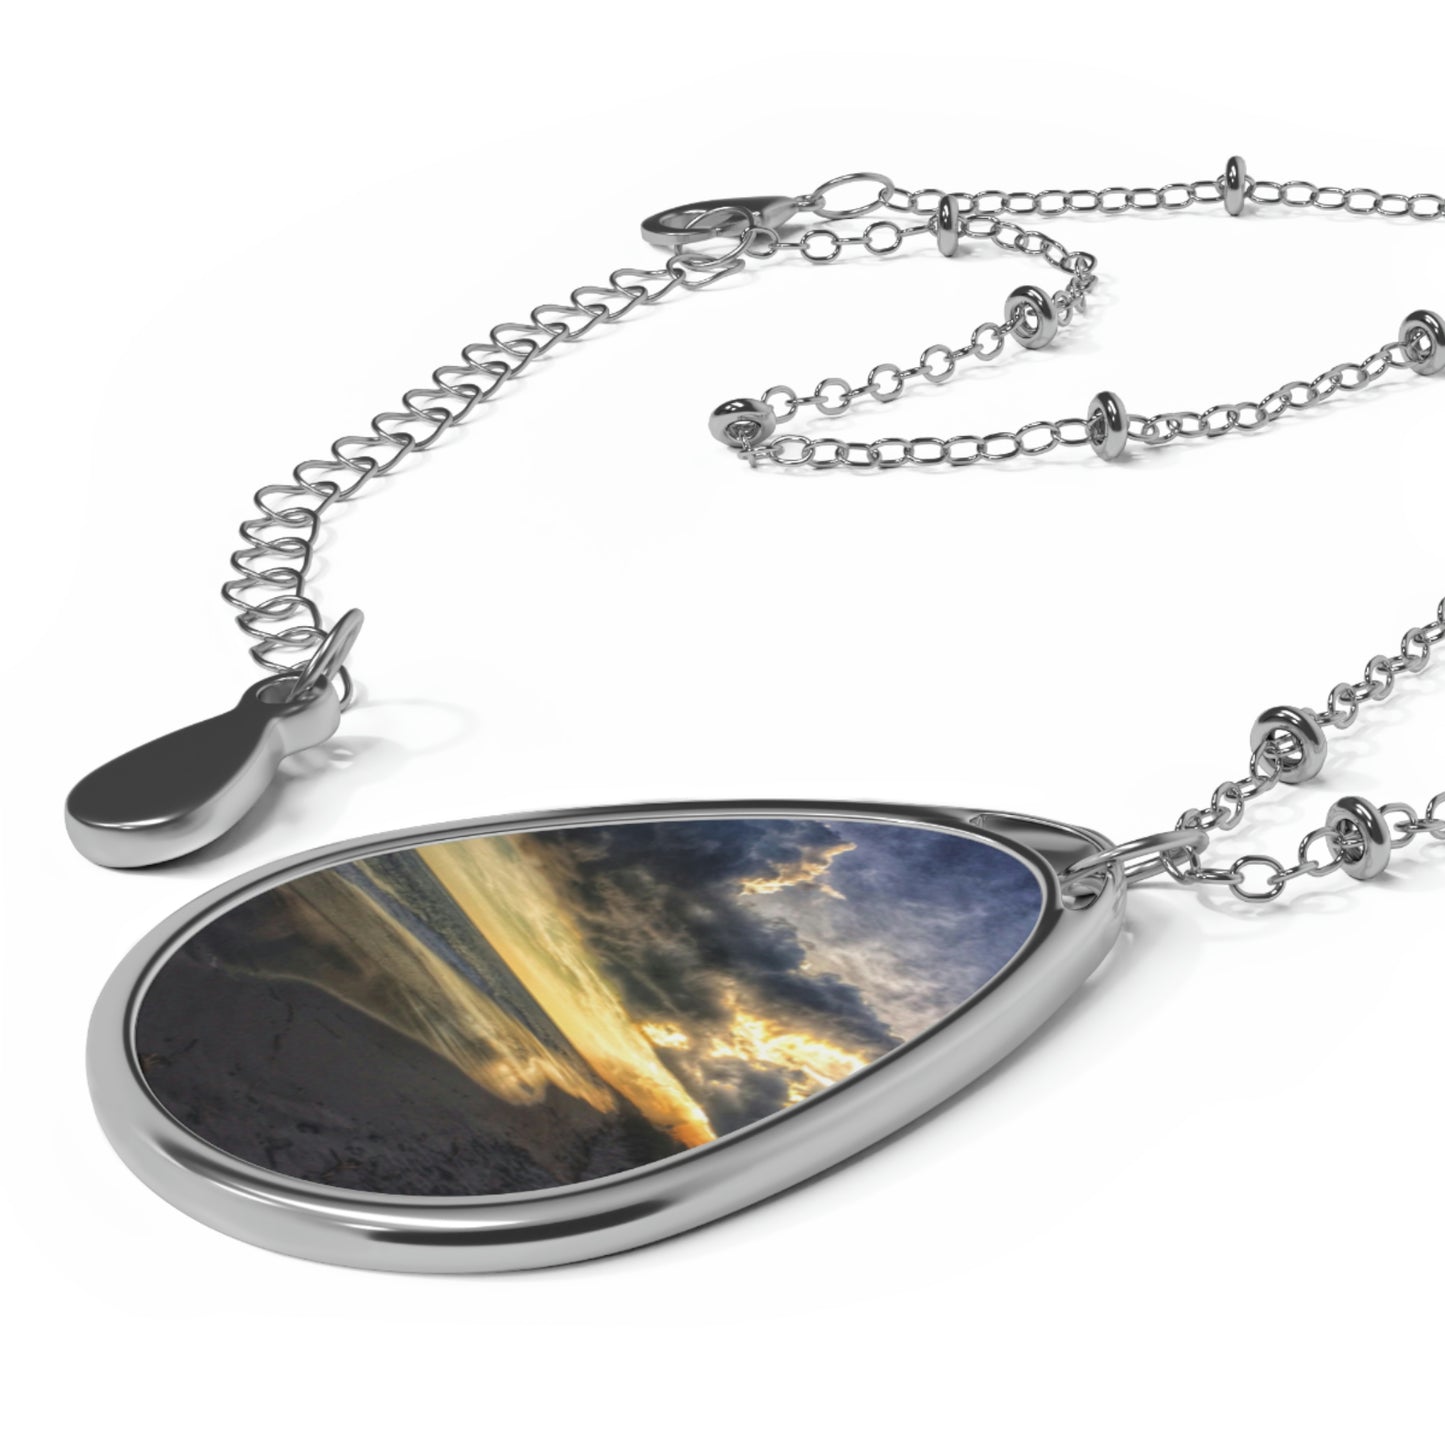 After the Storm Oval Necklace